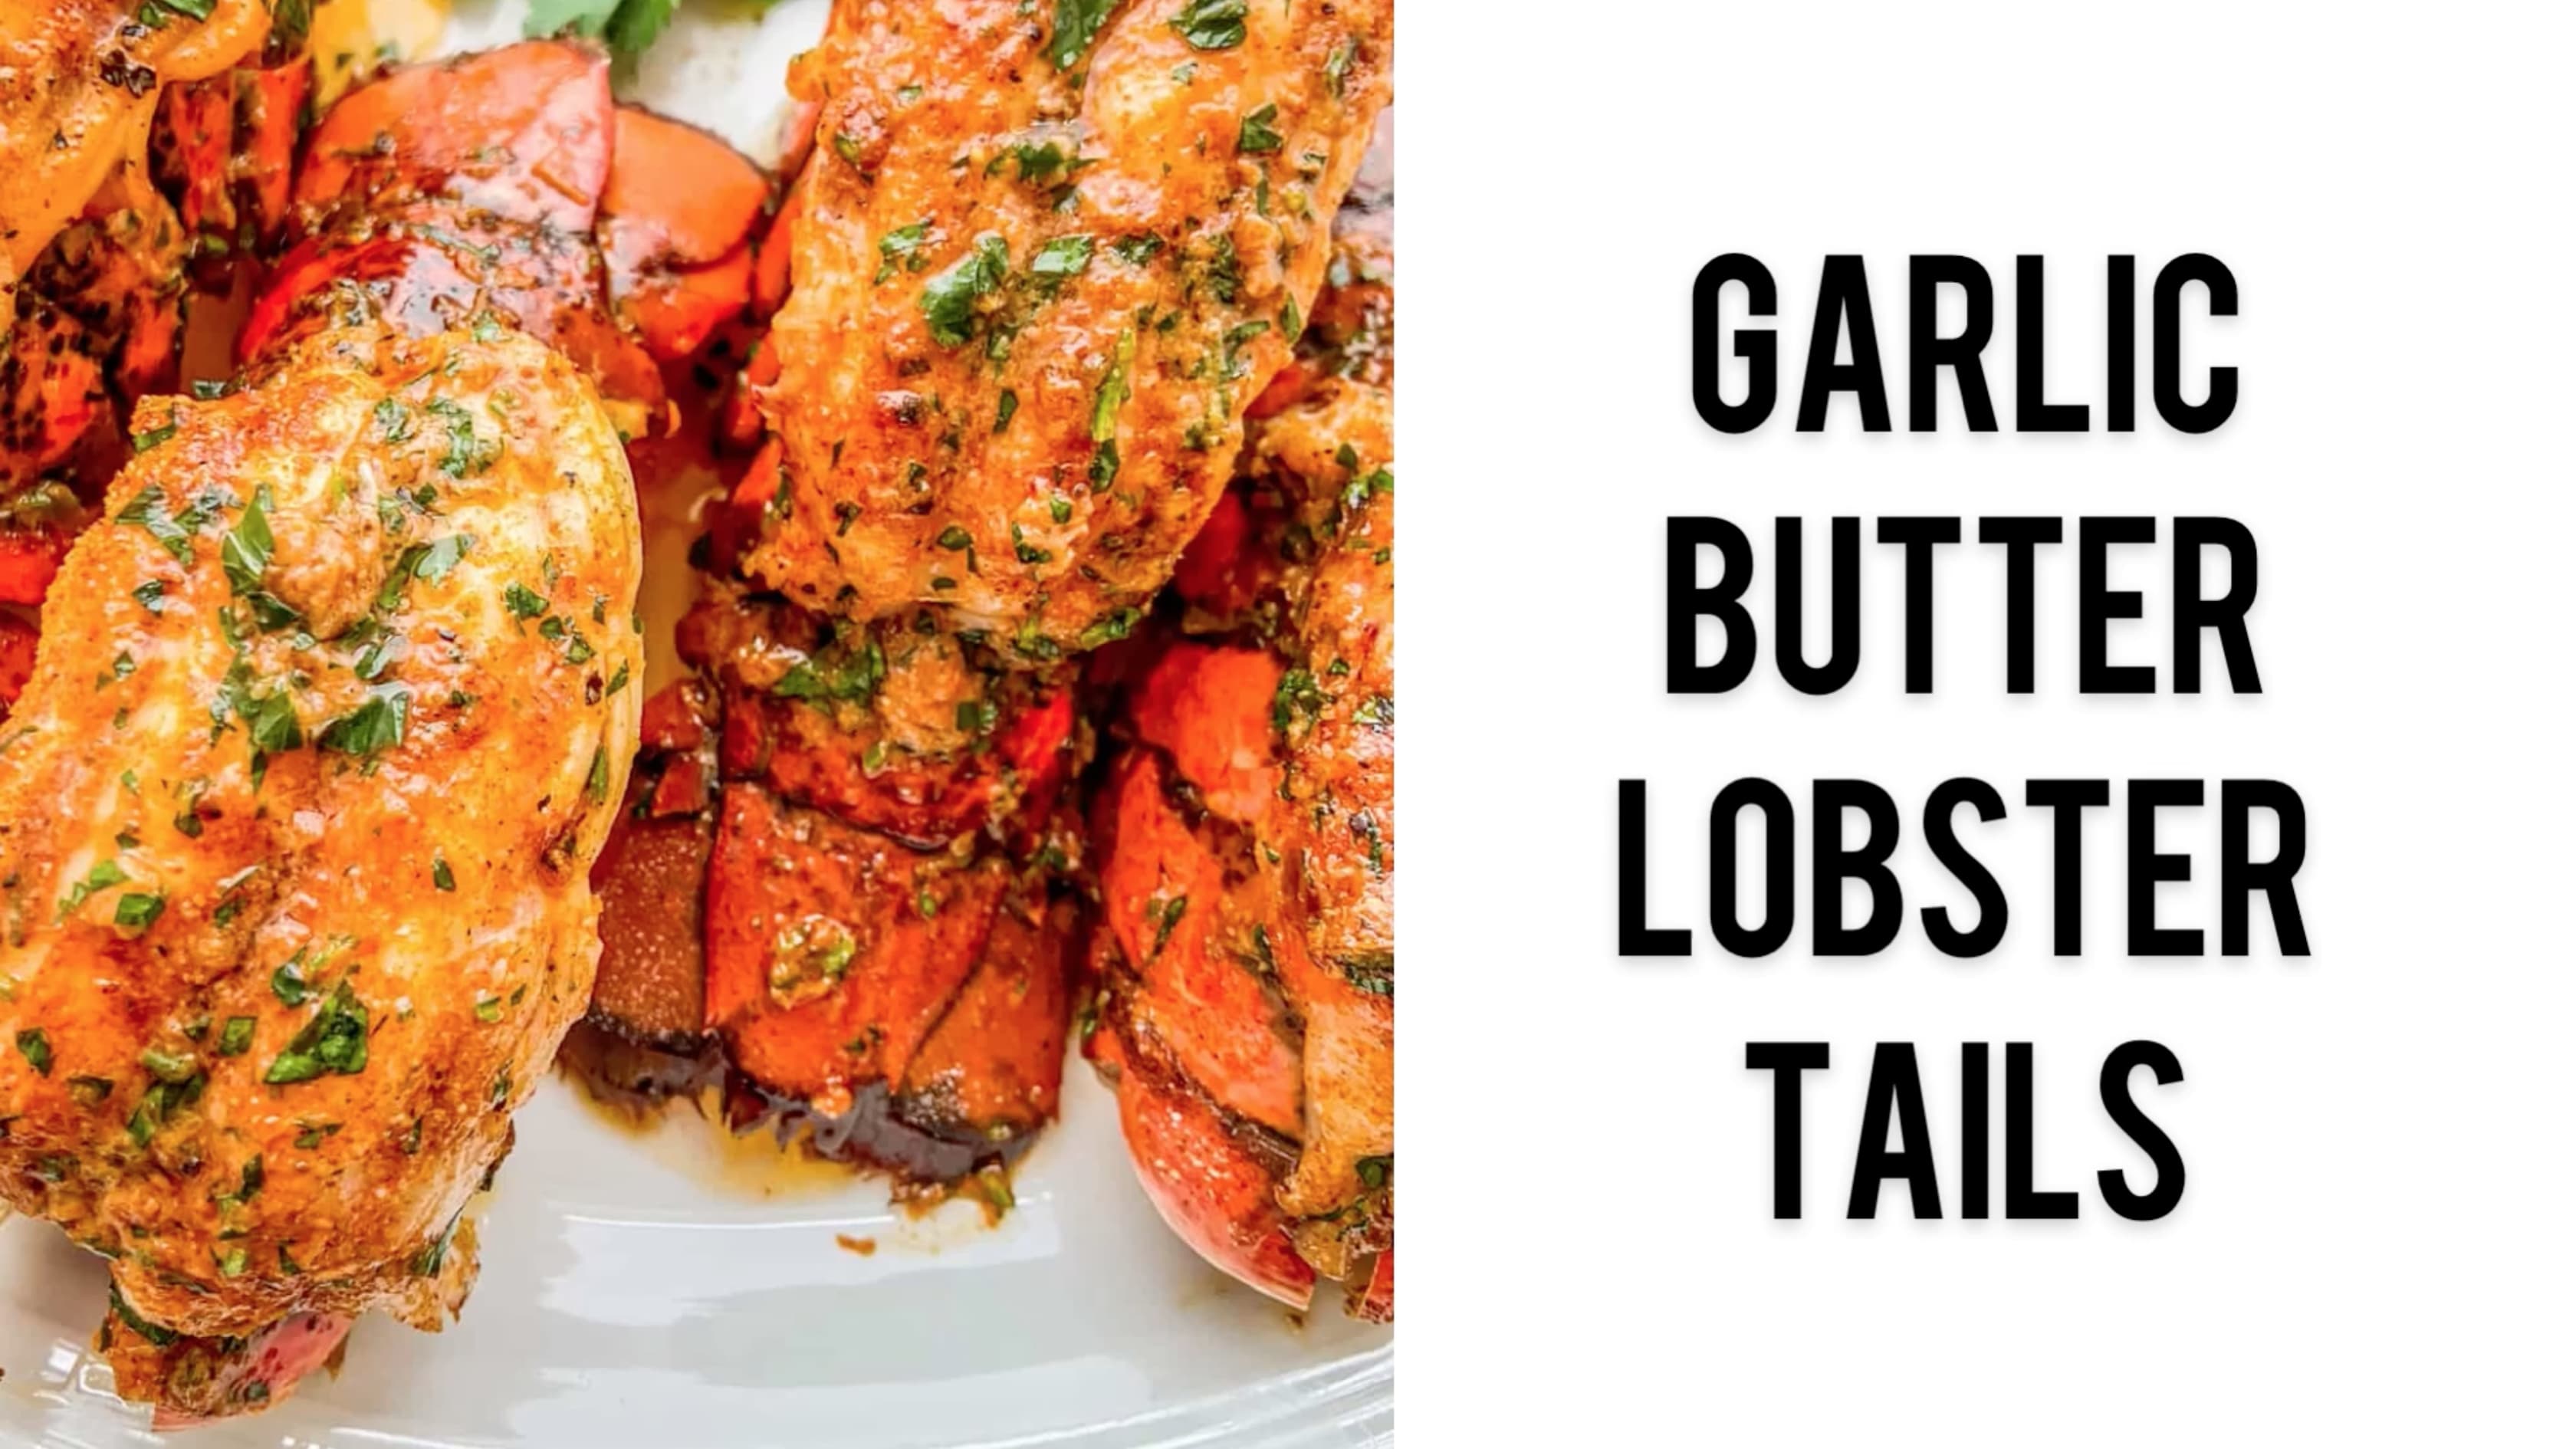 Garlic Butter Lobster Tails in the Microwave